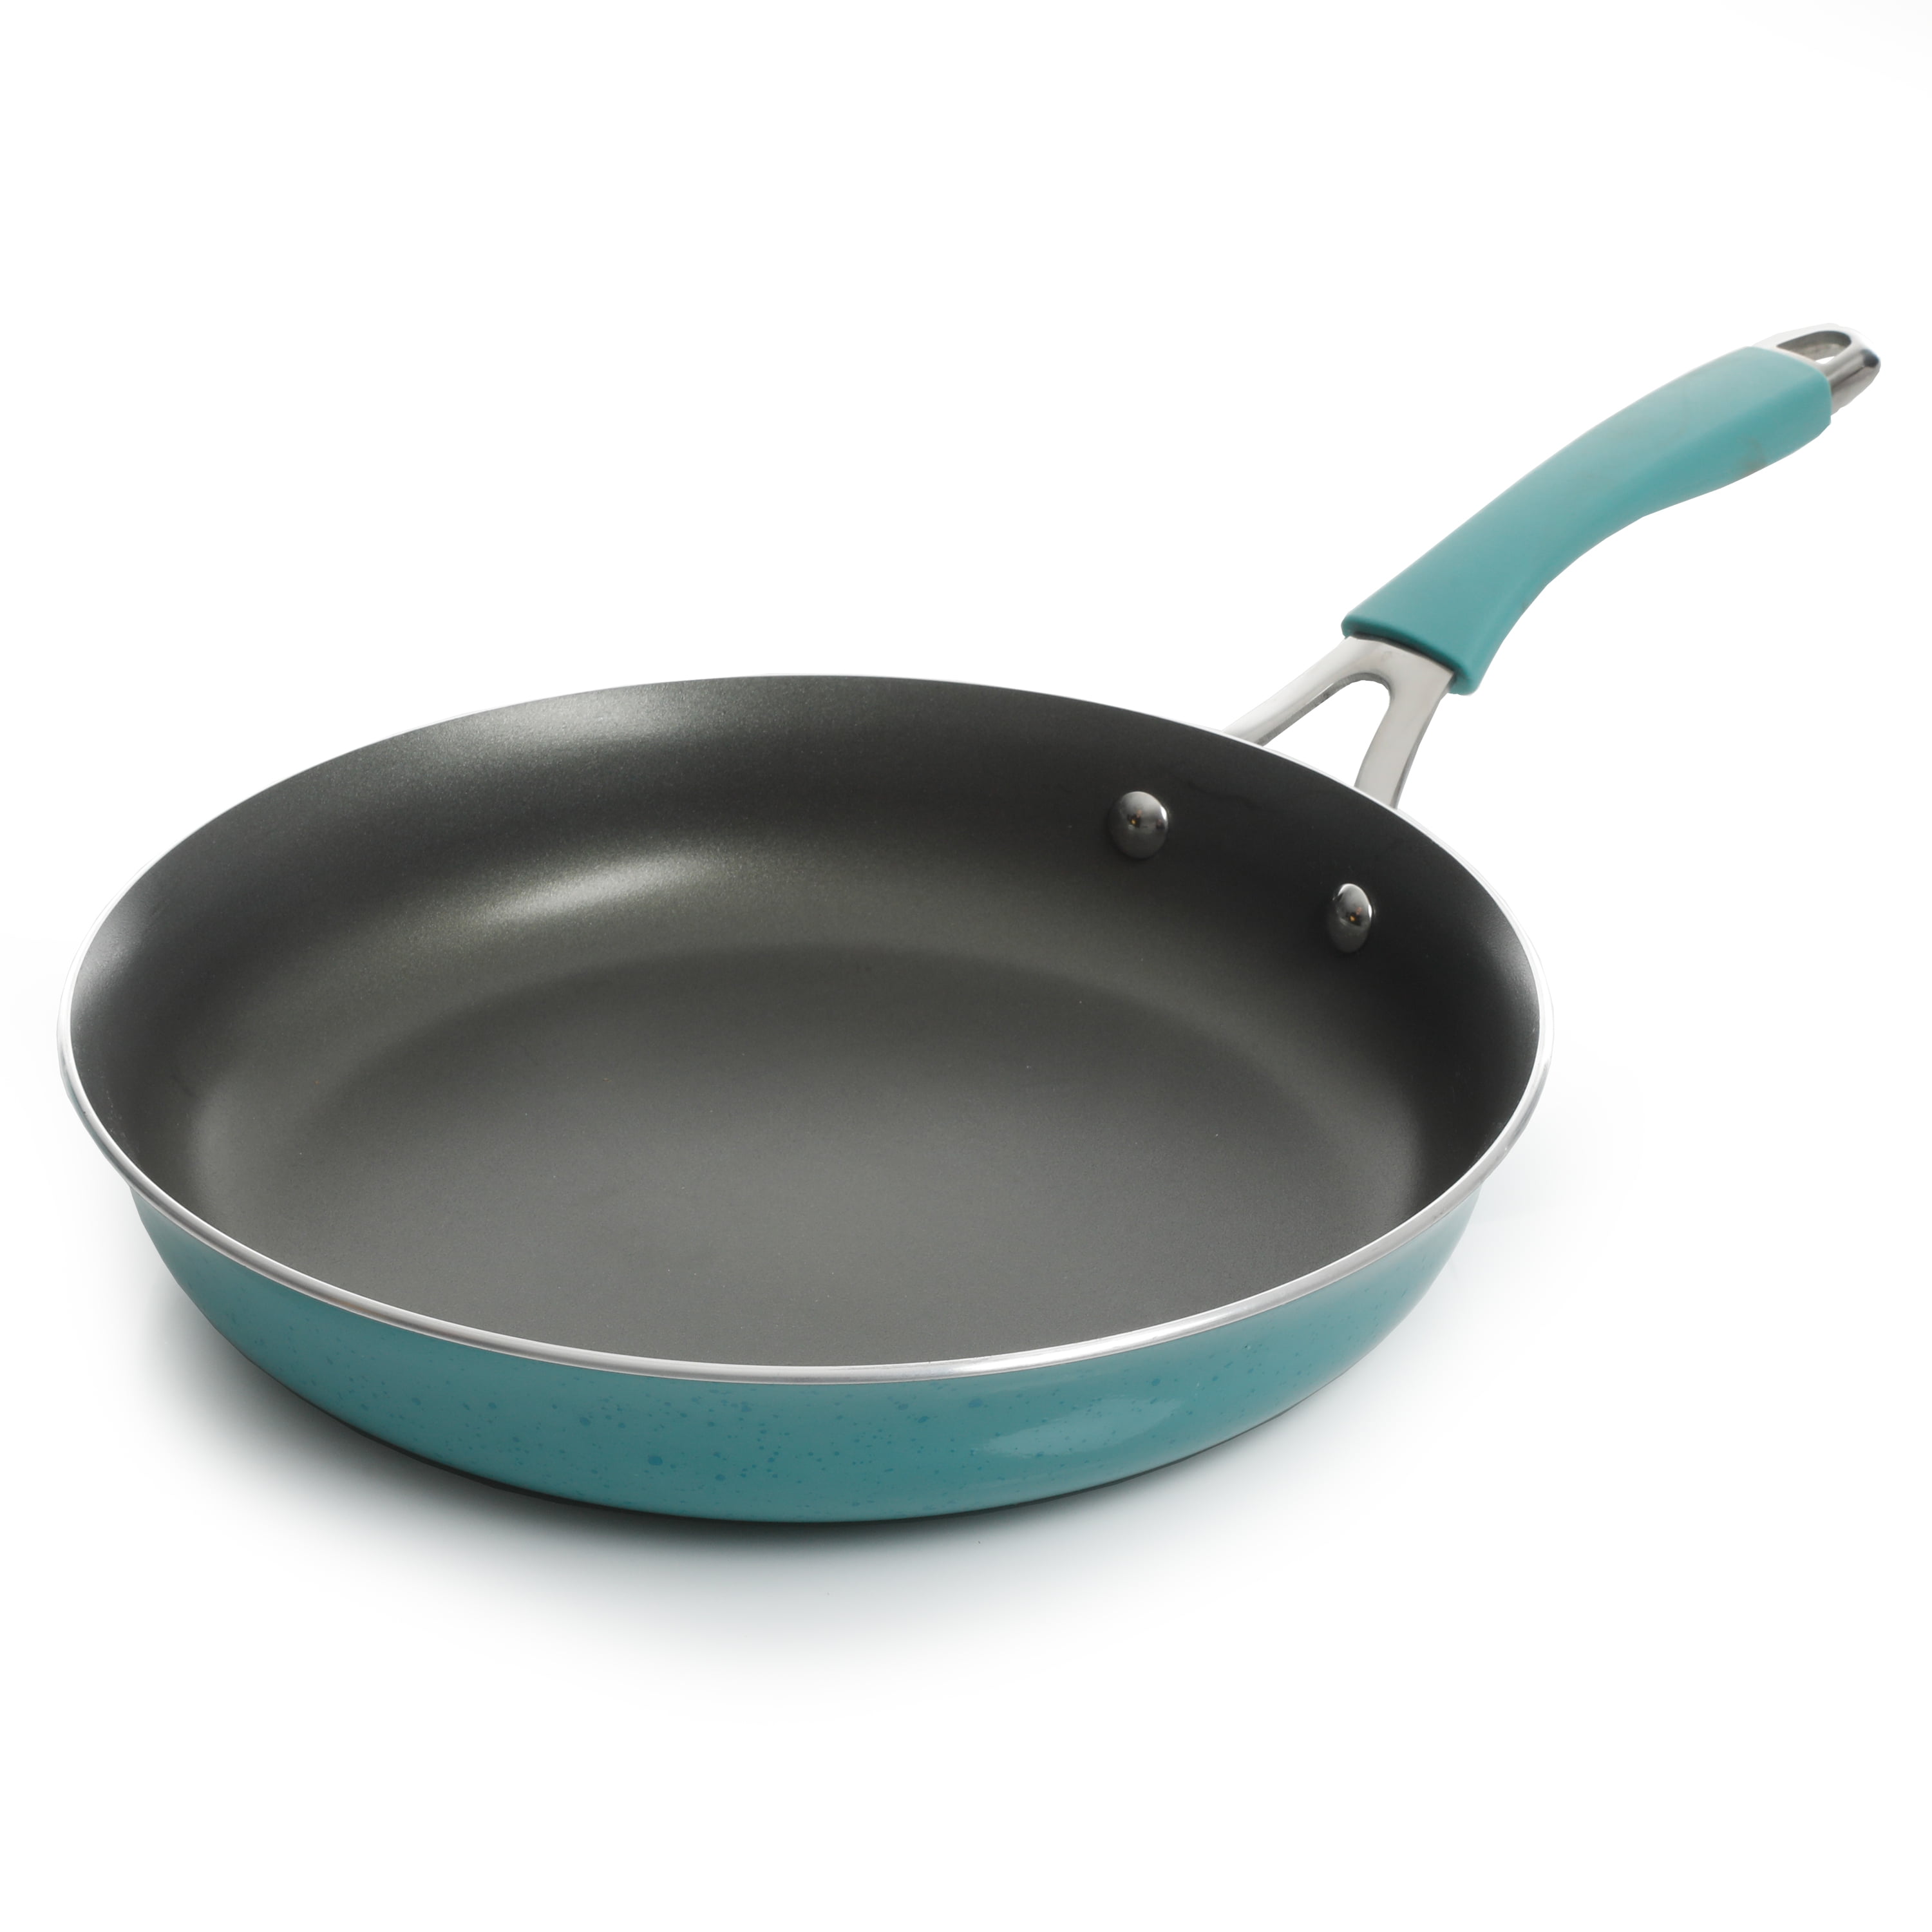 You Should Never Buy Nonstick Pans From The Pioneer Woman. Here's Why